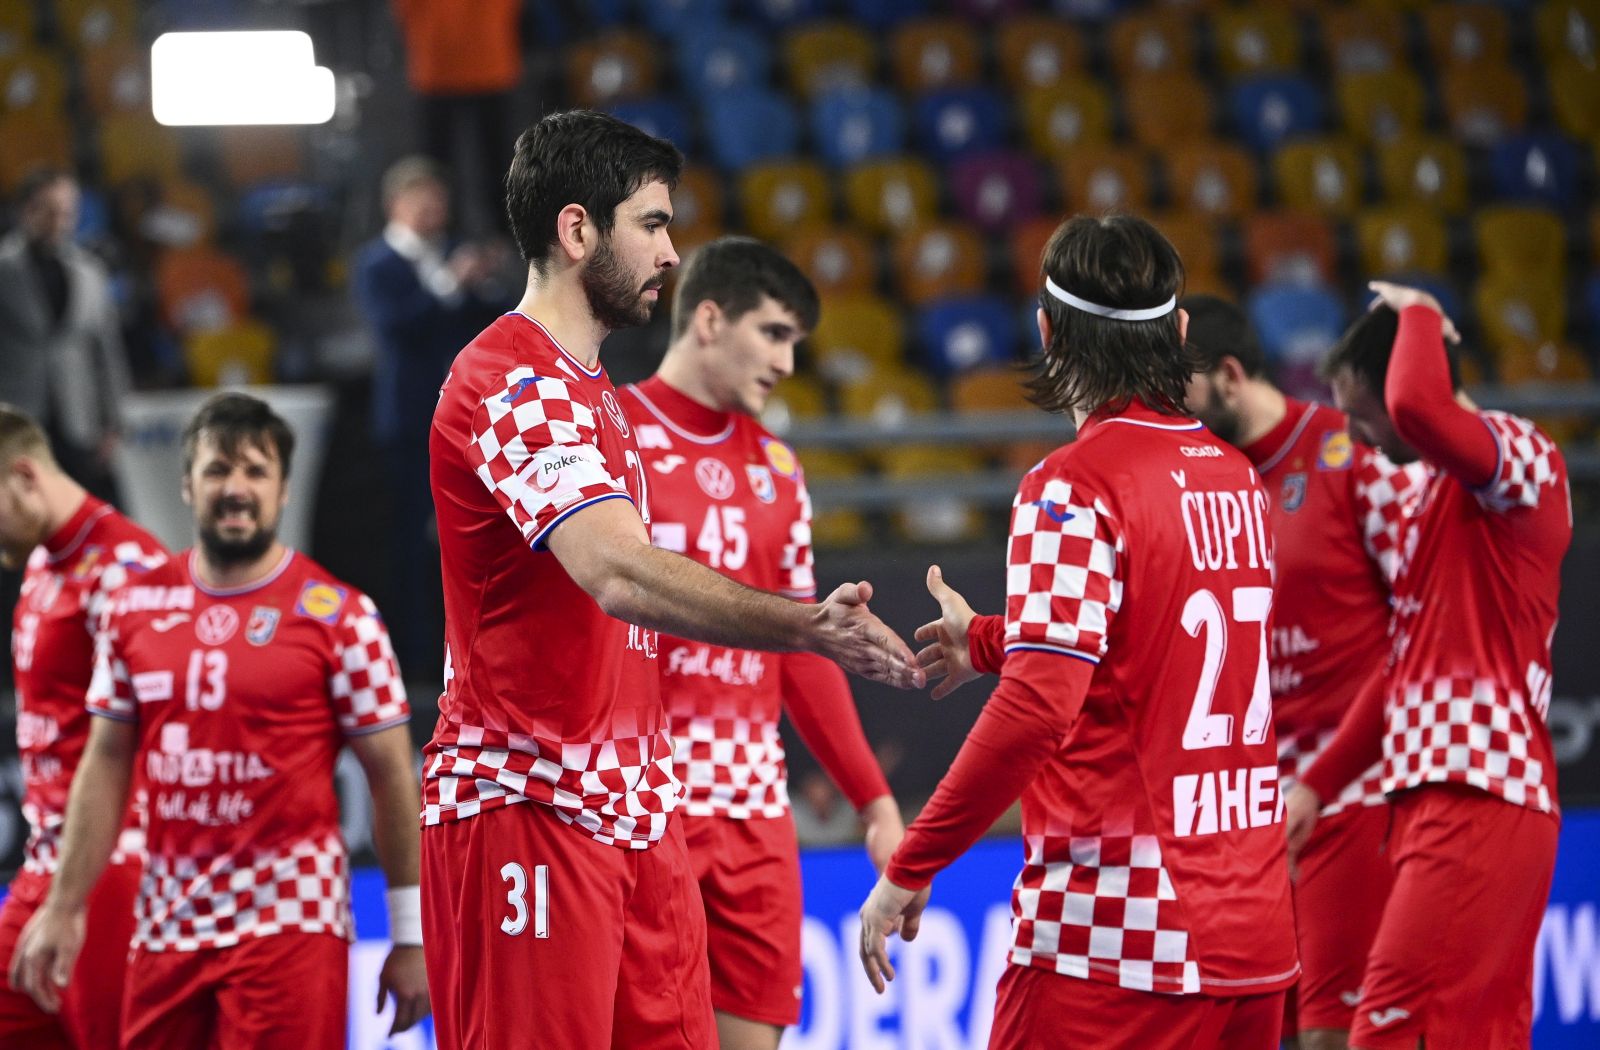 epa08960930 Croatian players react after the Main Round match between Argentina and Croatia at the 27th Men's Handball World Championship in Cairo, Egypt, 23 January 2021.  EPA/Anne-Christine Poujoulat / POOL